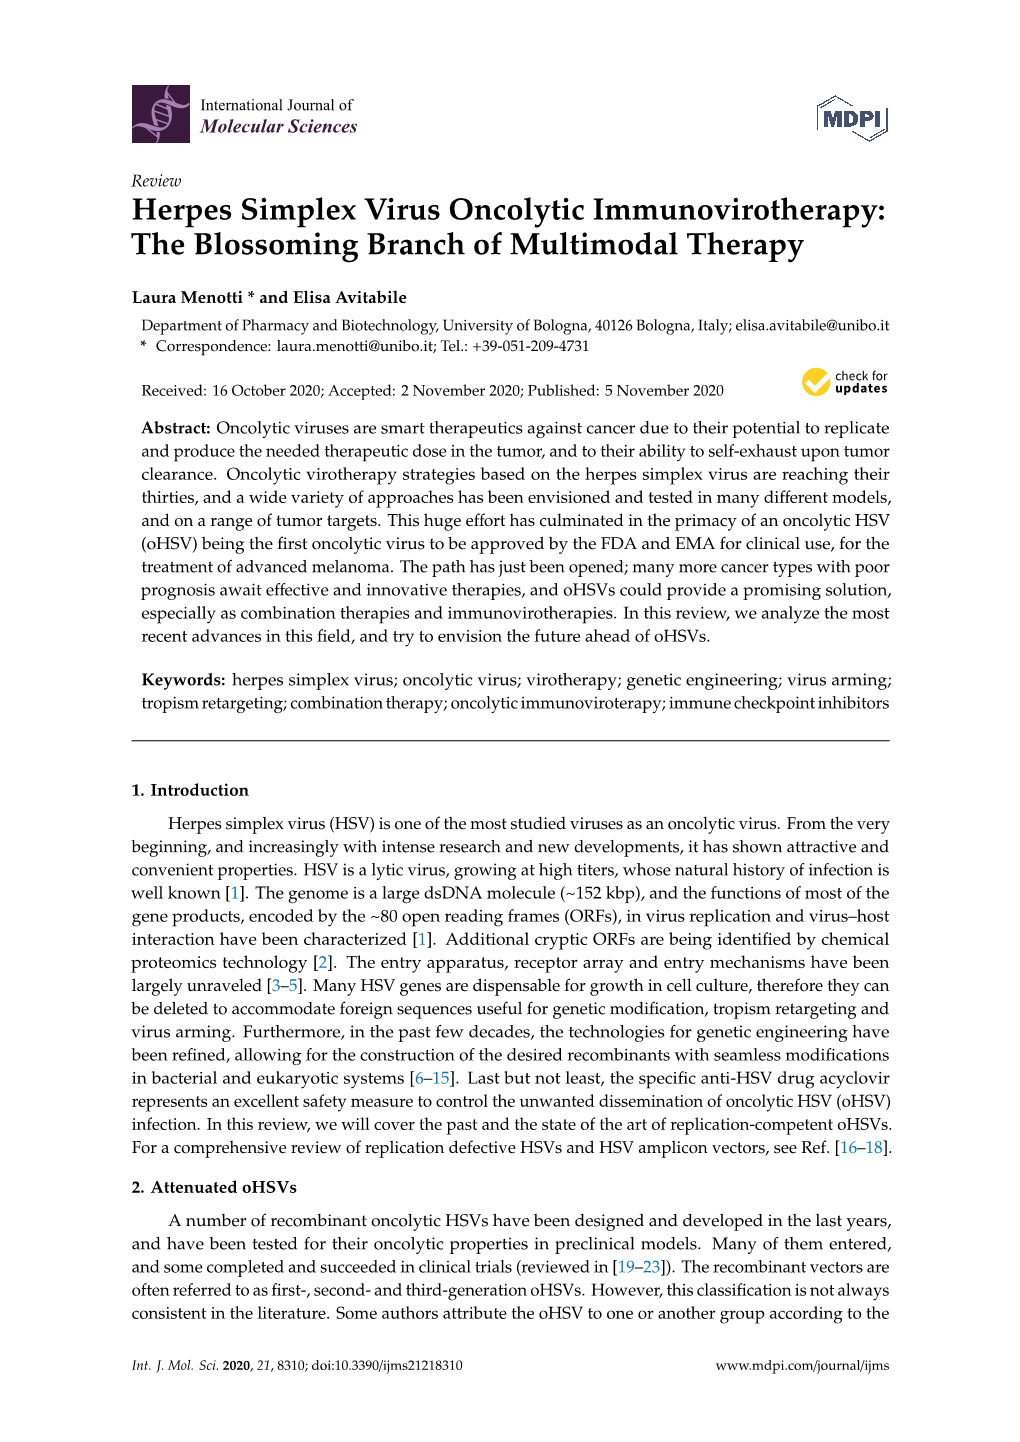 Herpes Simplex Virus Oncolytic Immunovirotherapy: the Blossoming Branch of Multimodal Therapy